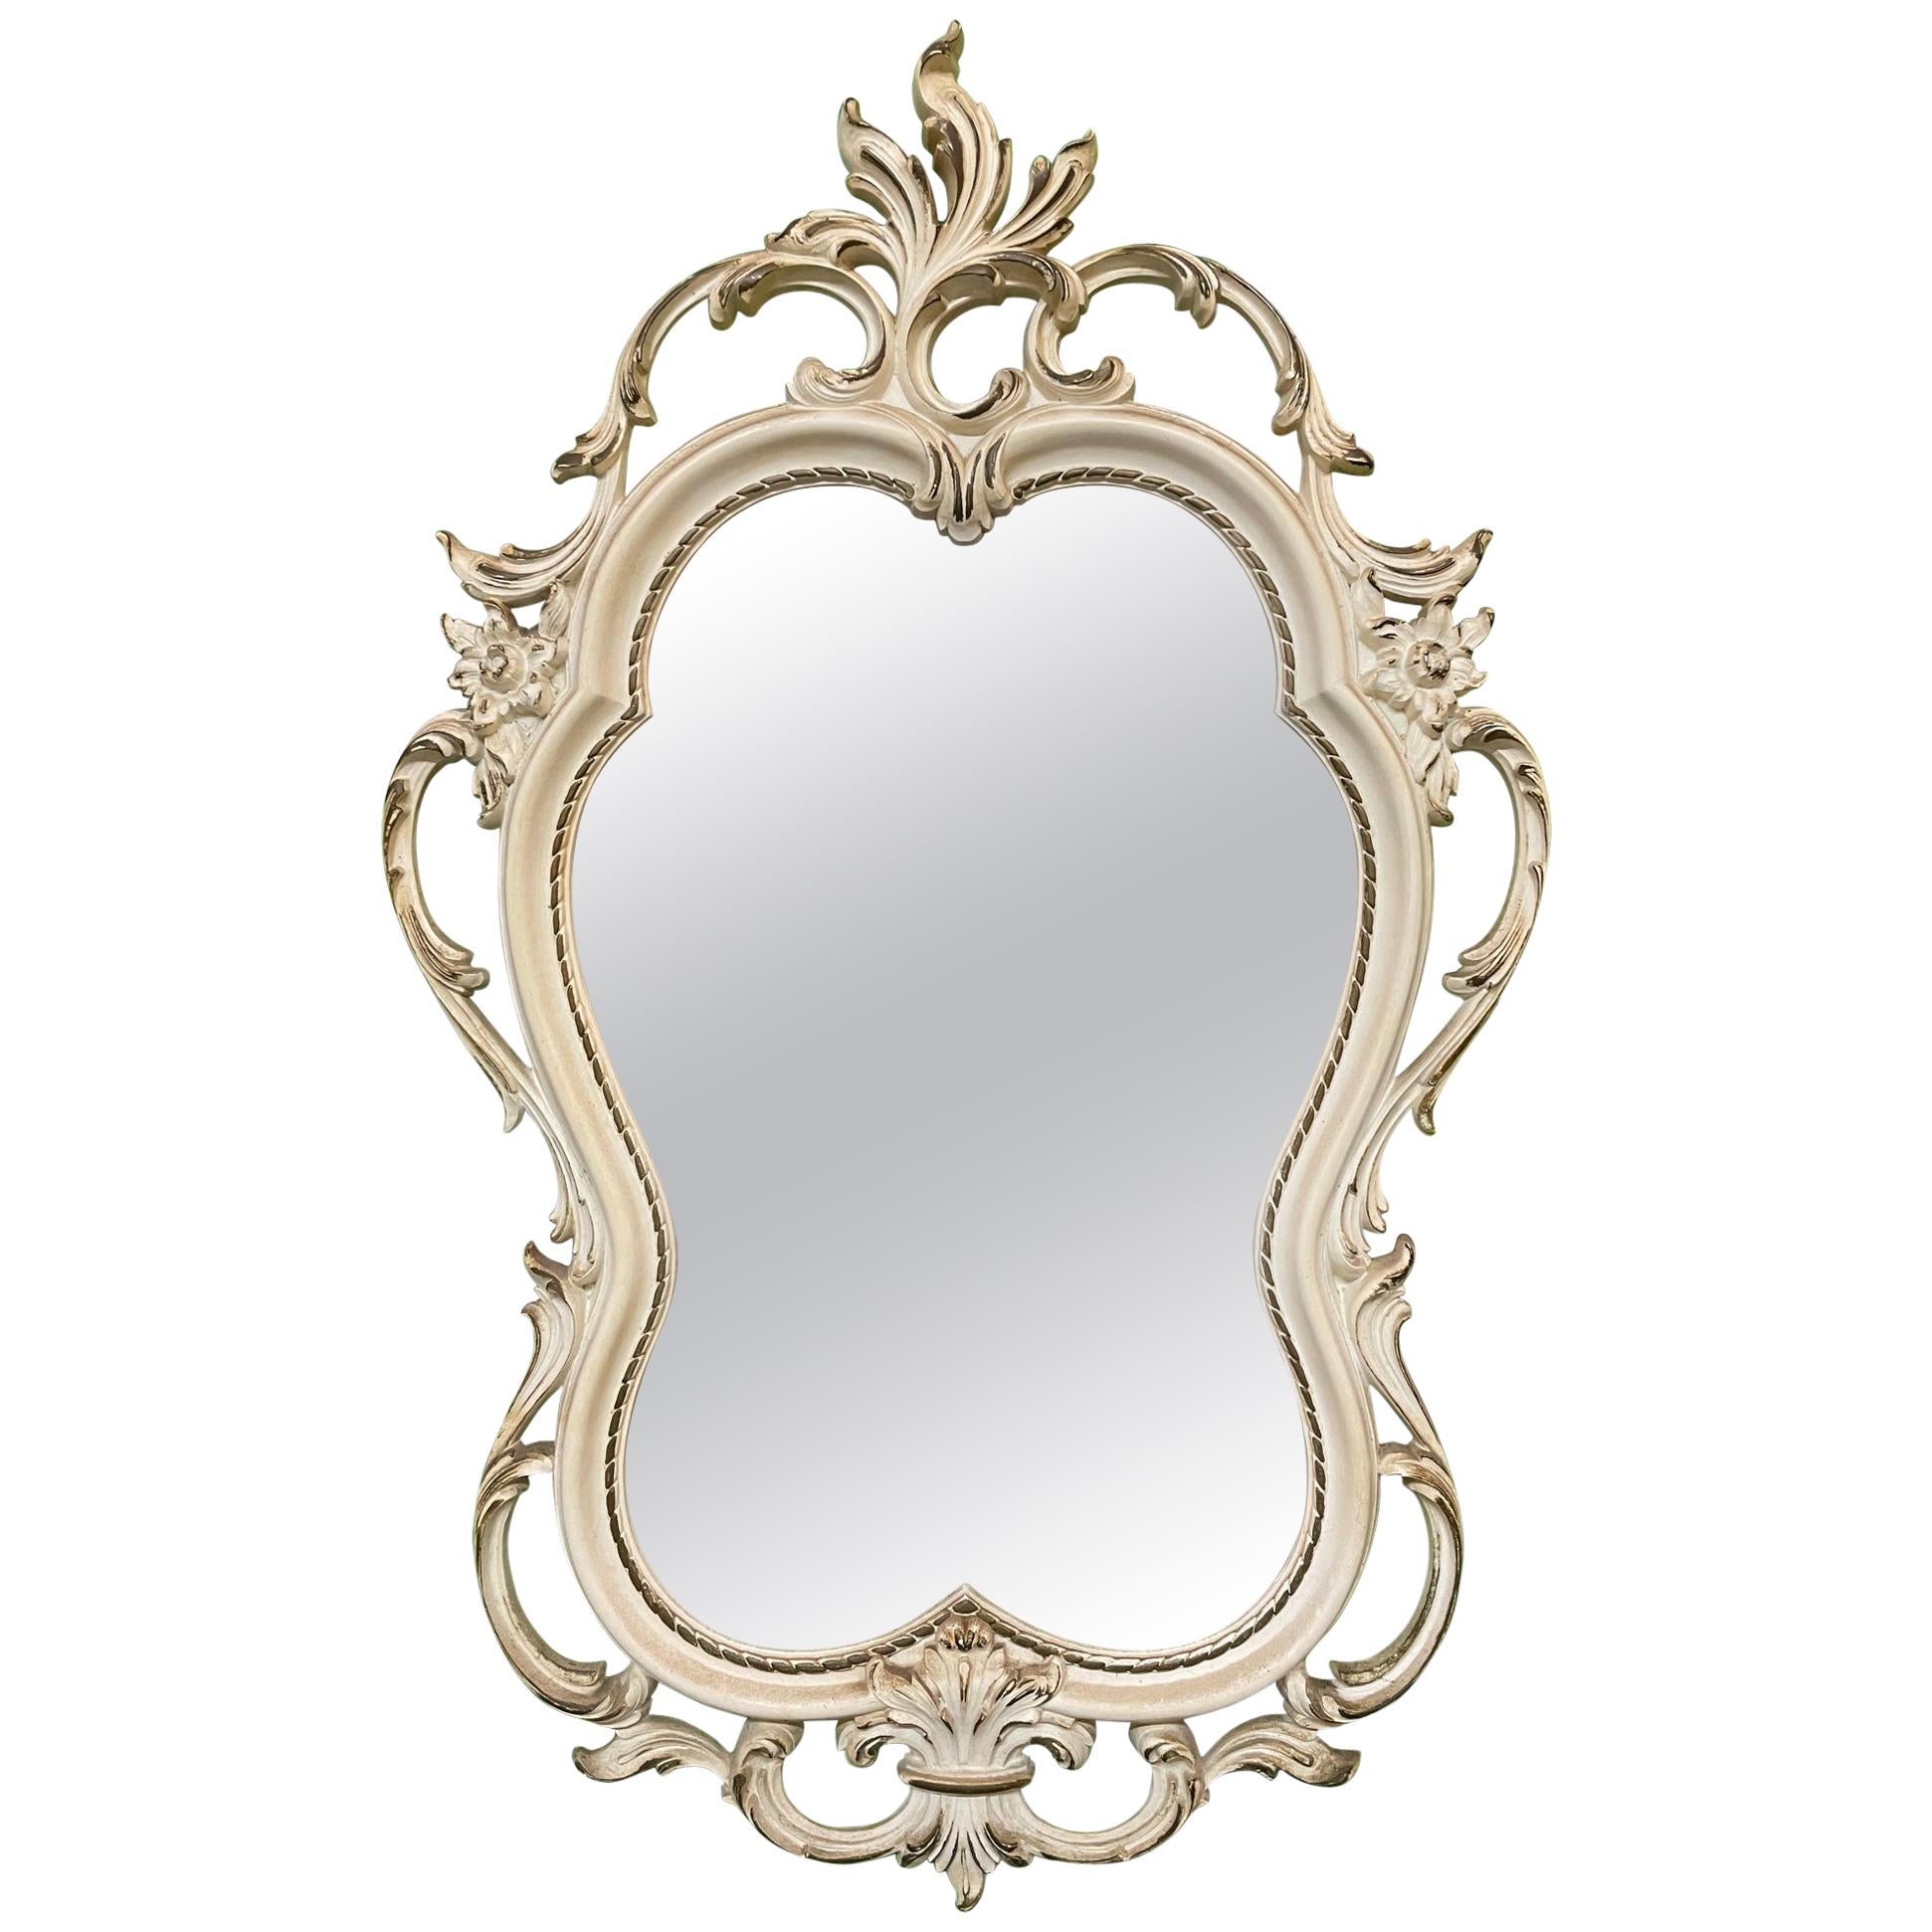 Hand Carved Acanthus Leaf Scrollwork Mirror by Syroco